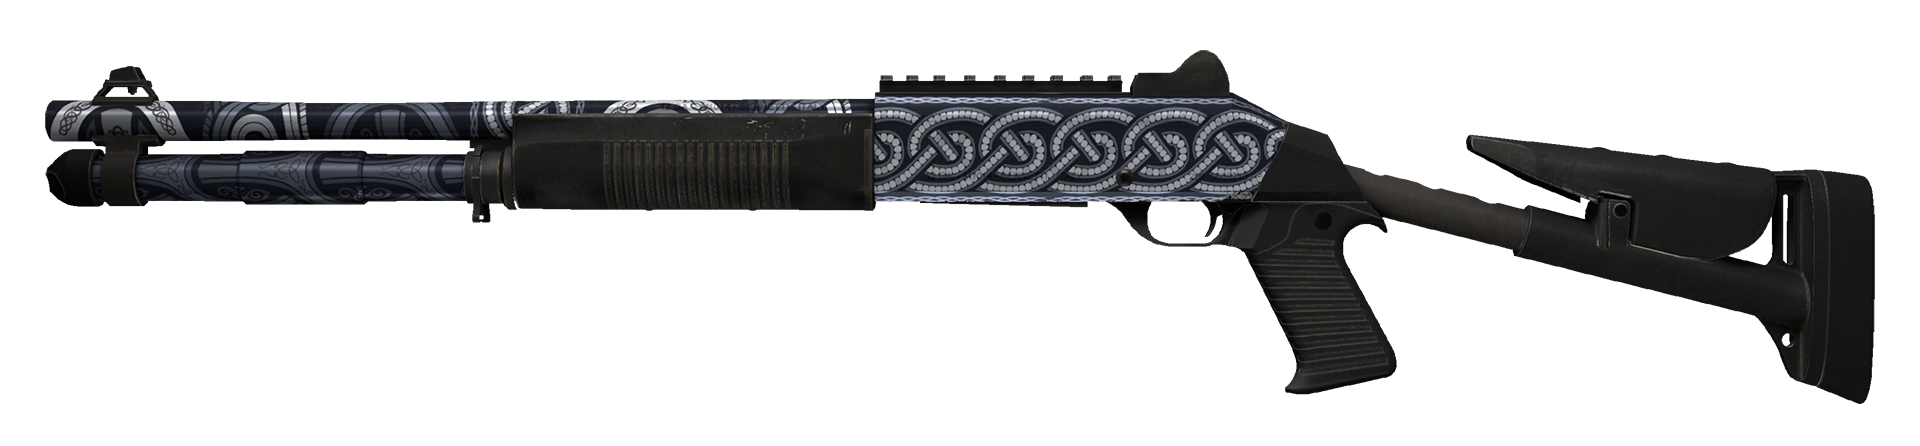 XM1014 Frost Borre Large Rendering